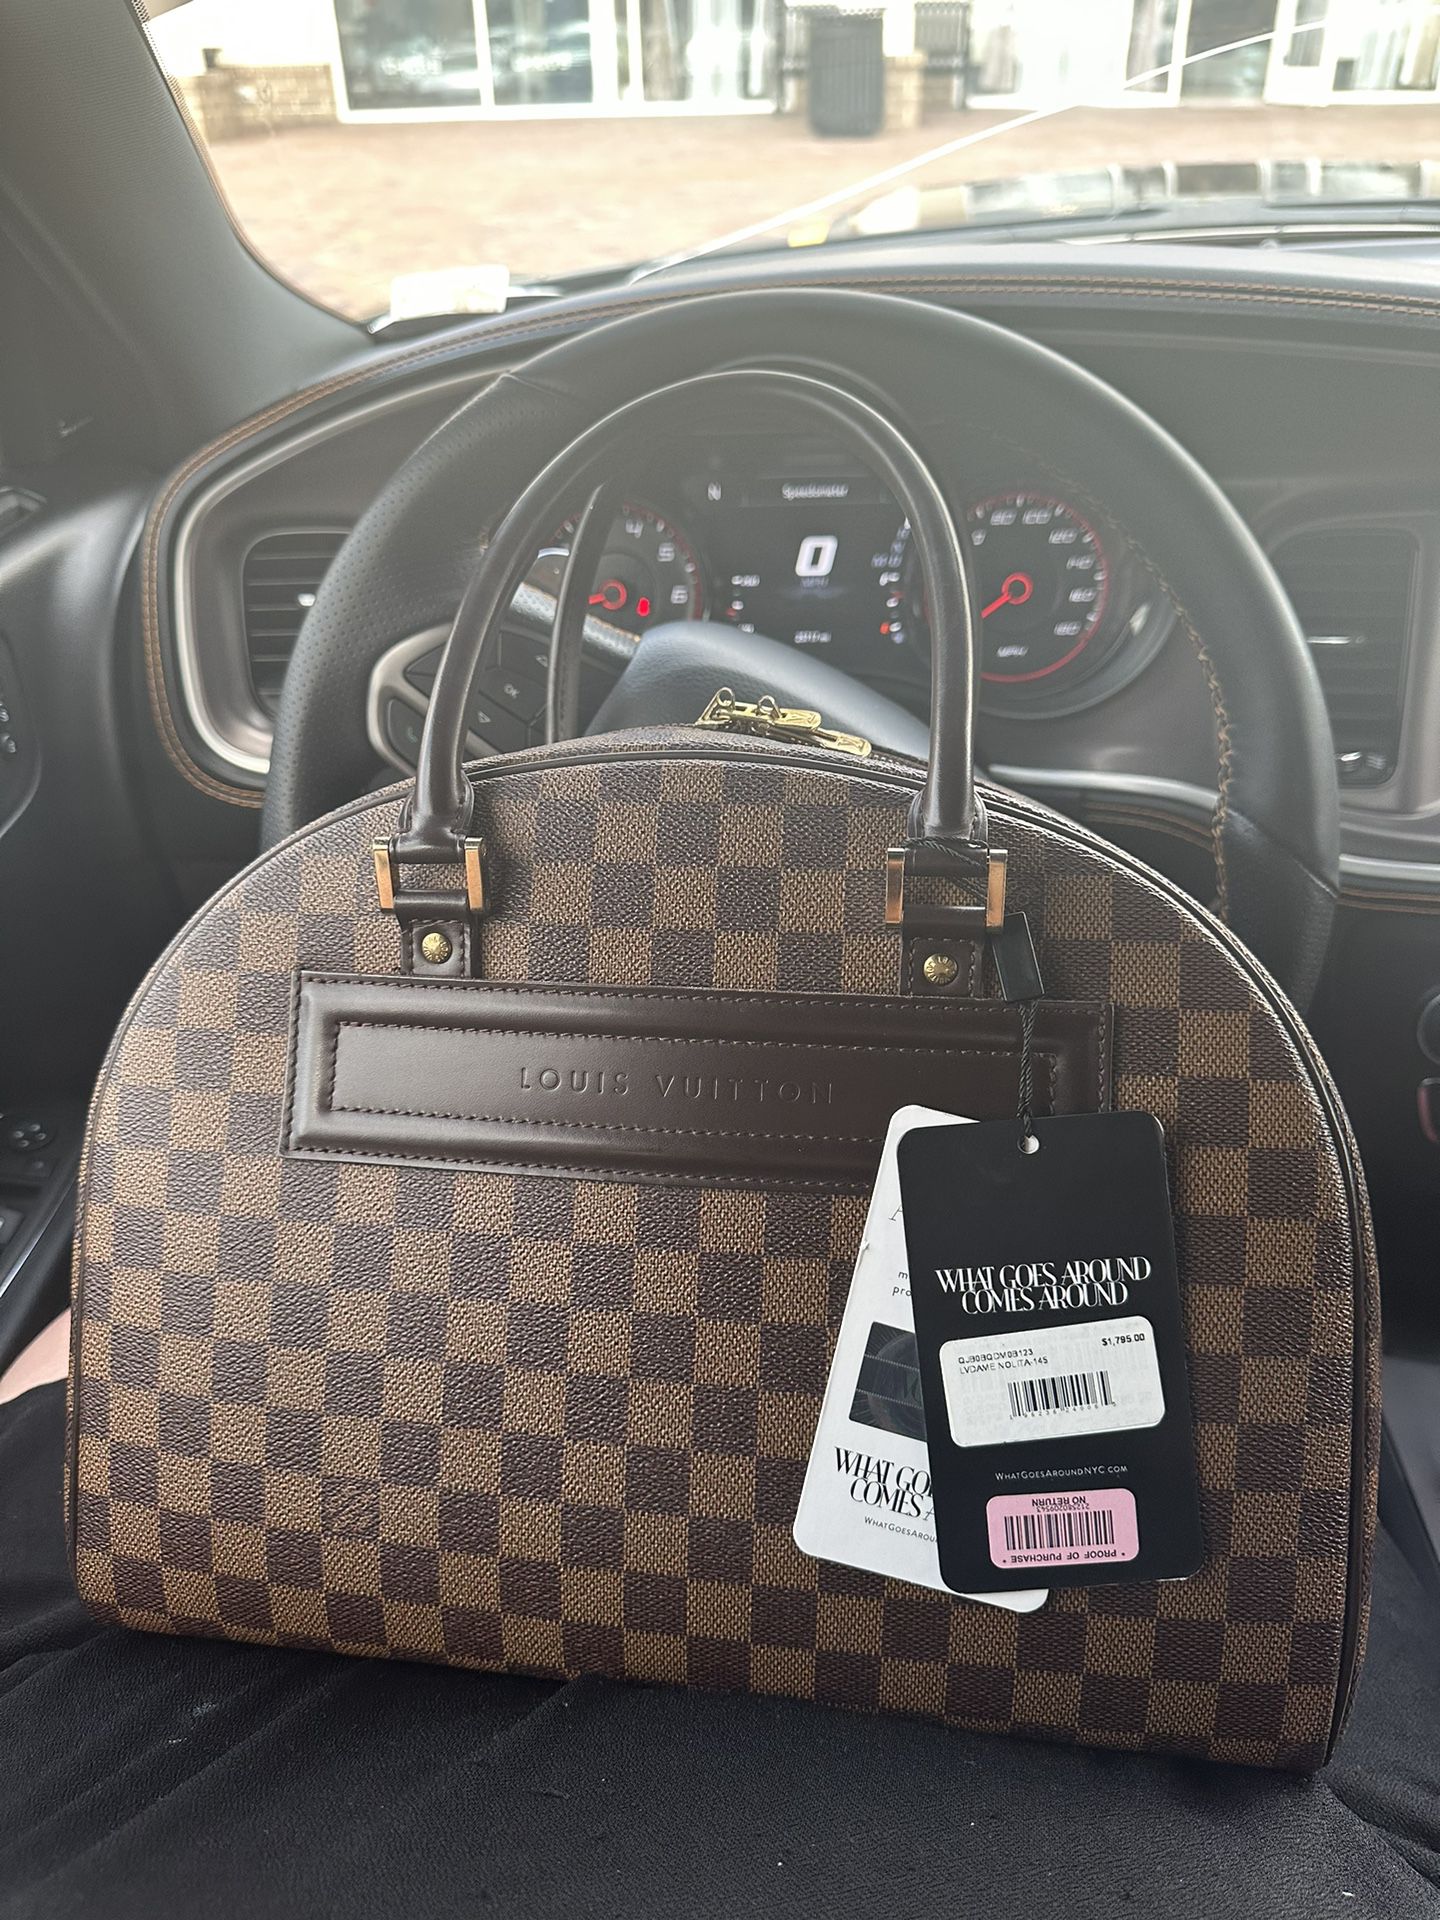 Belmont MM Louis Vuitton Purse for Sale in Charlotte, NC - OfferUp